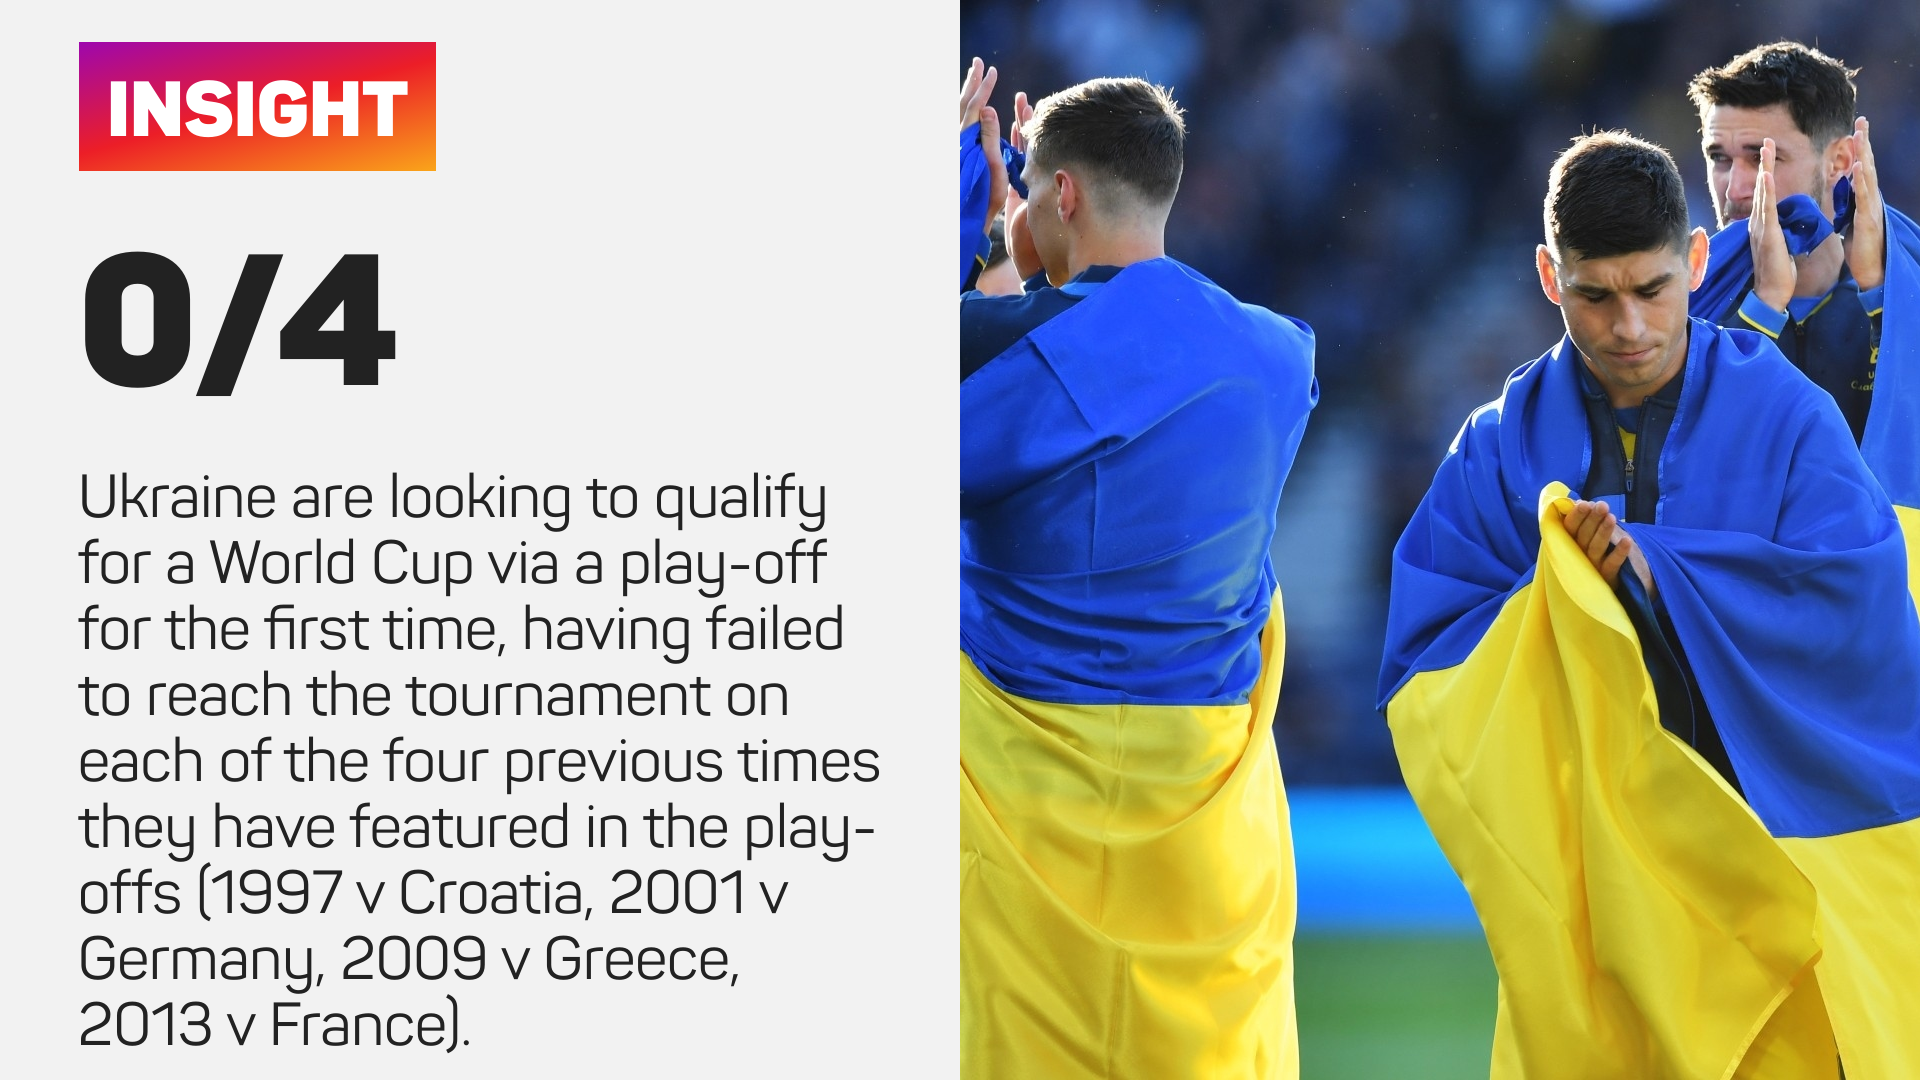 Ukraine have never qualified for the World Cup via the play-offs